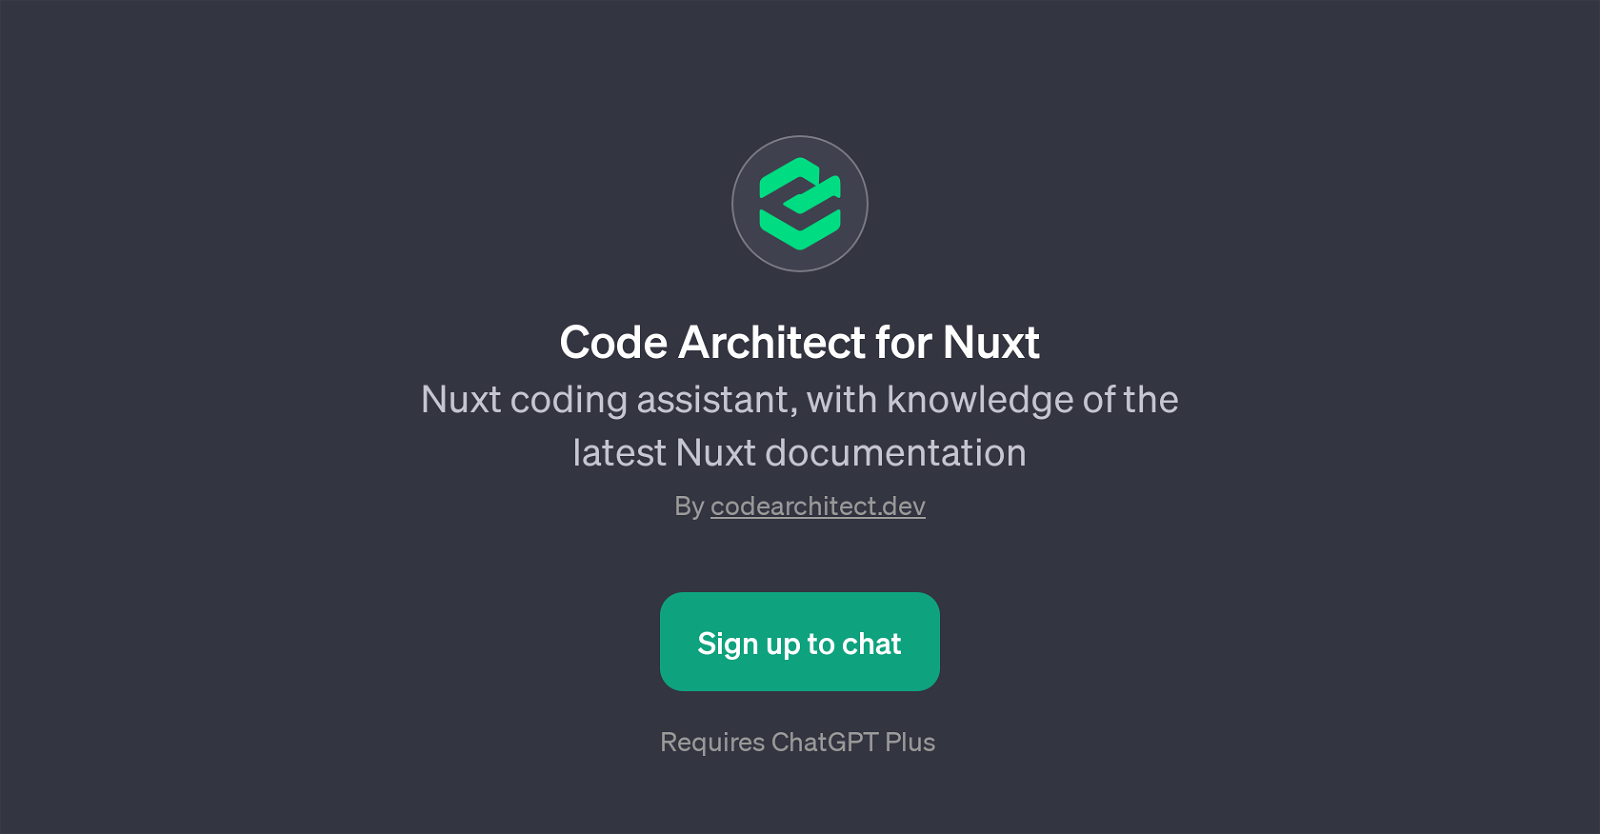 Code Architect for Nuxt website